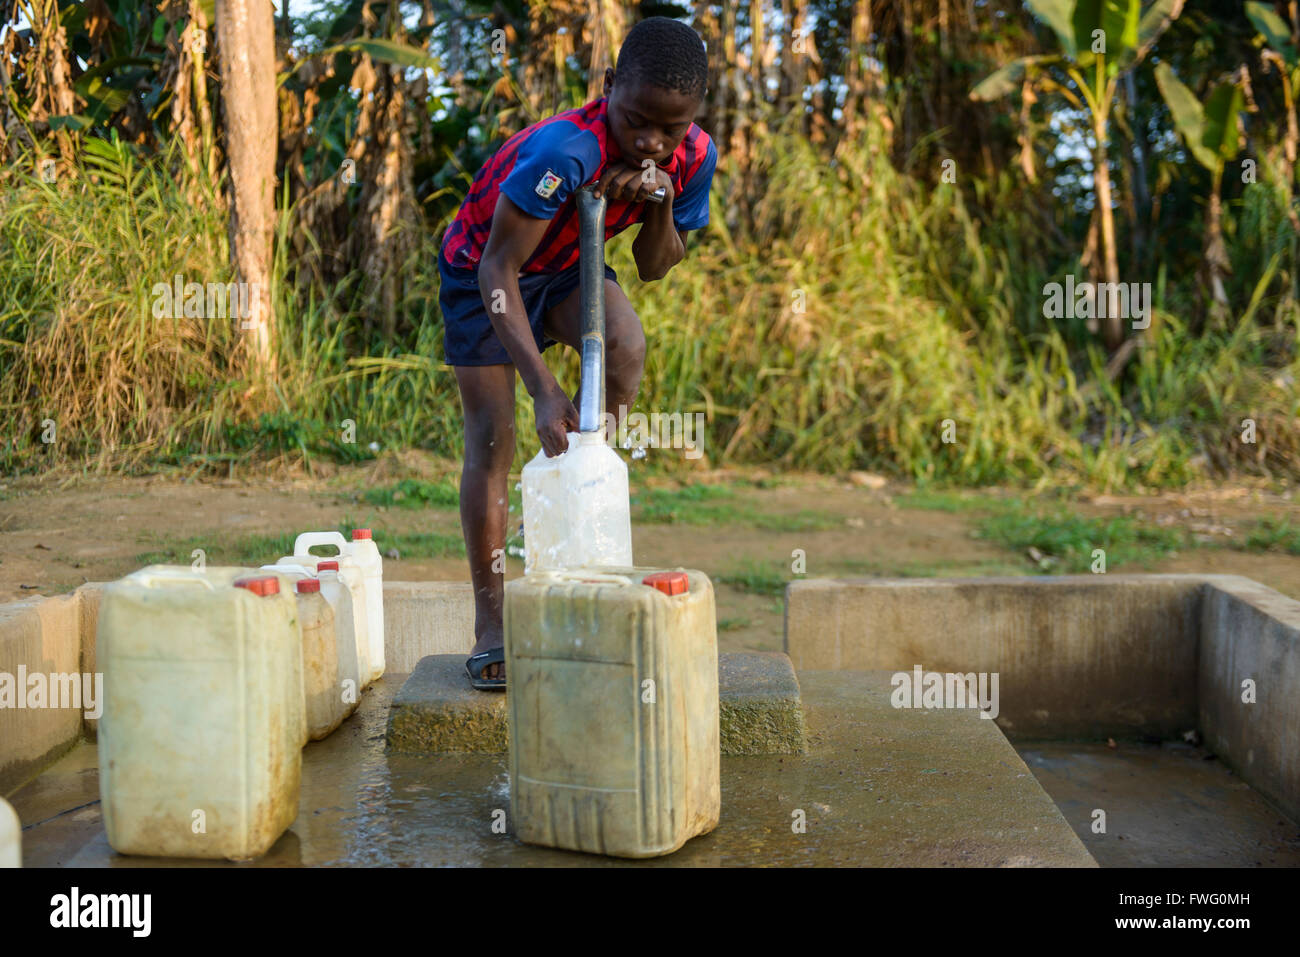 Boy collecting water, Gabon, Central Africa Stock Photo